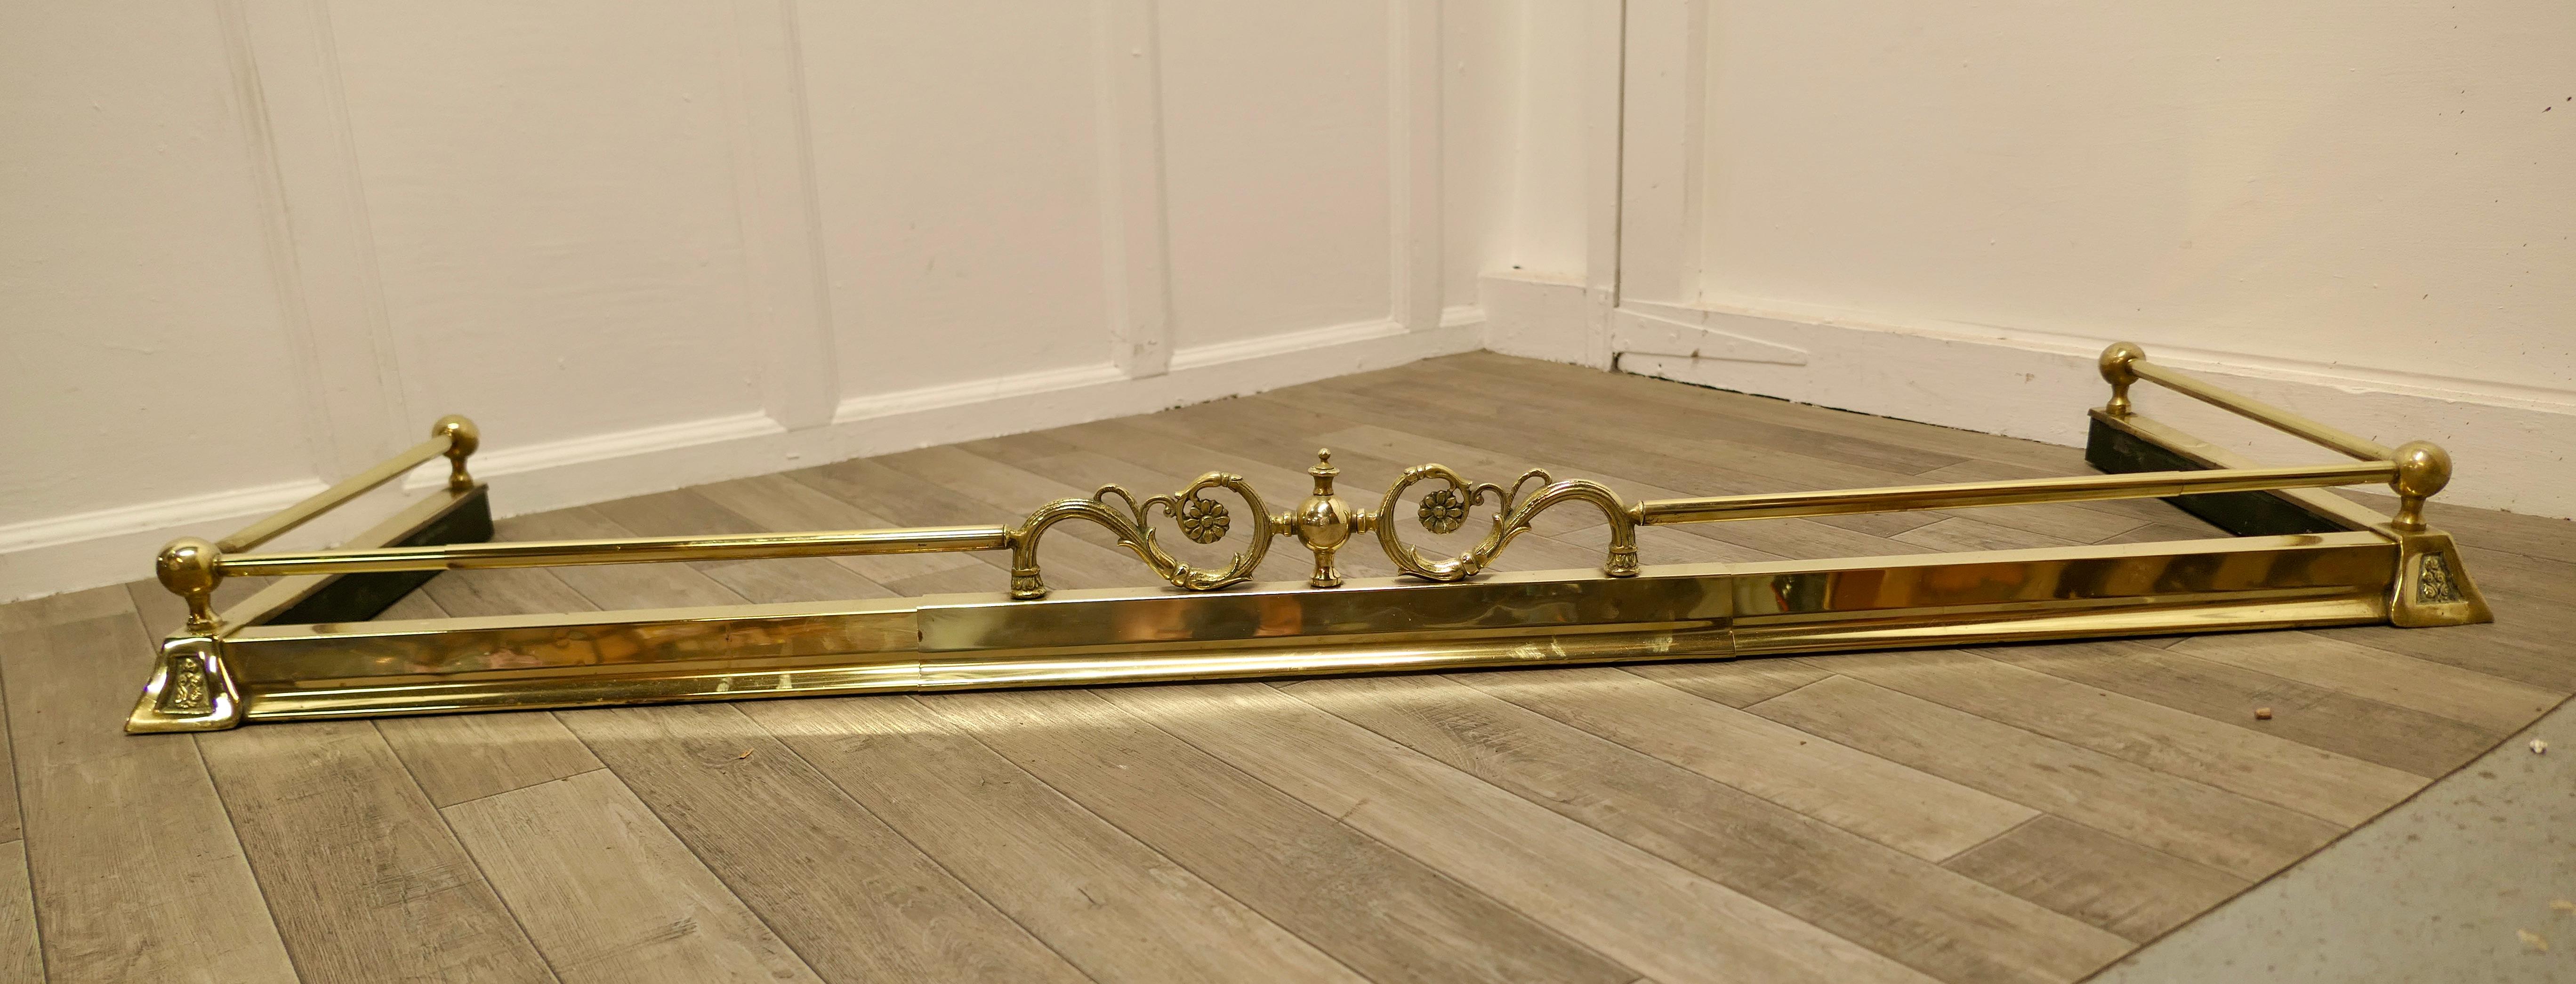 An Art Nouveau Victorian extending brass fender 

This is a very attractive Brass Fender it has a decorative centre section in the Art Nouveau style with swirls and flowers in the brass rail above the simple brass base
The Fender is in good